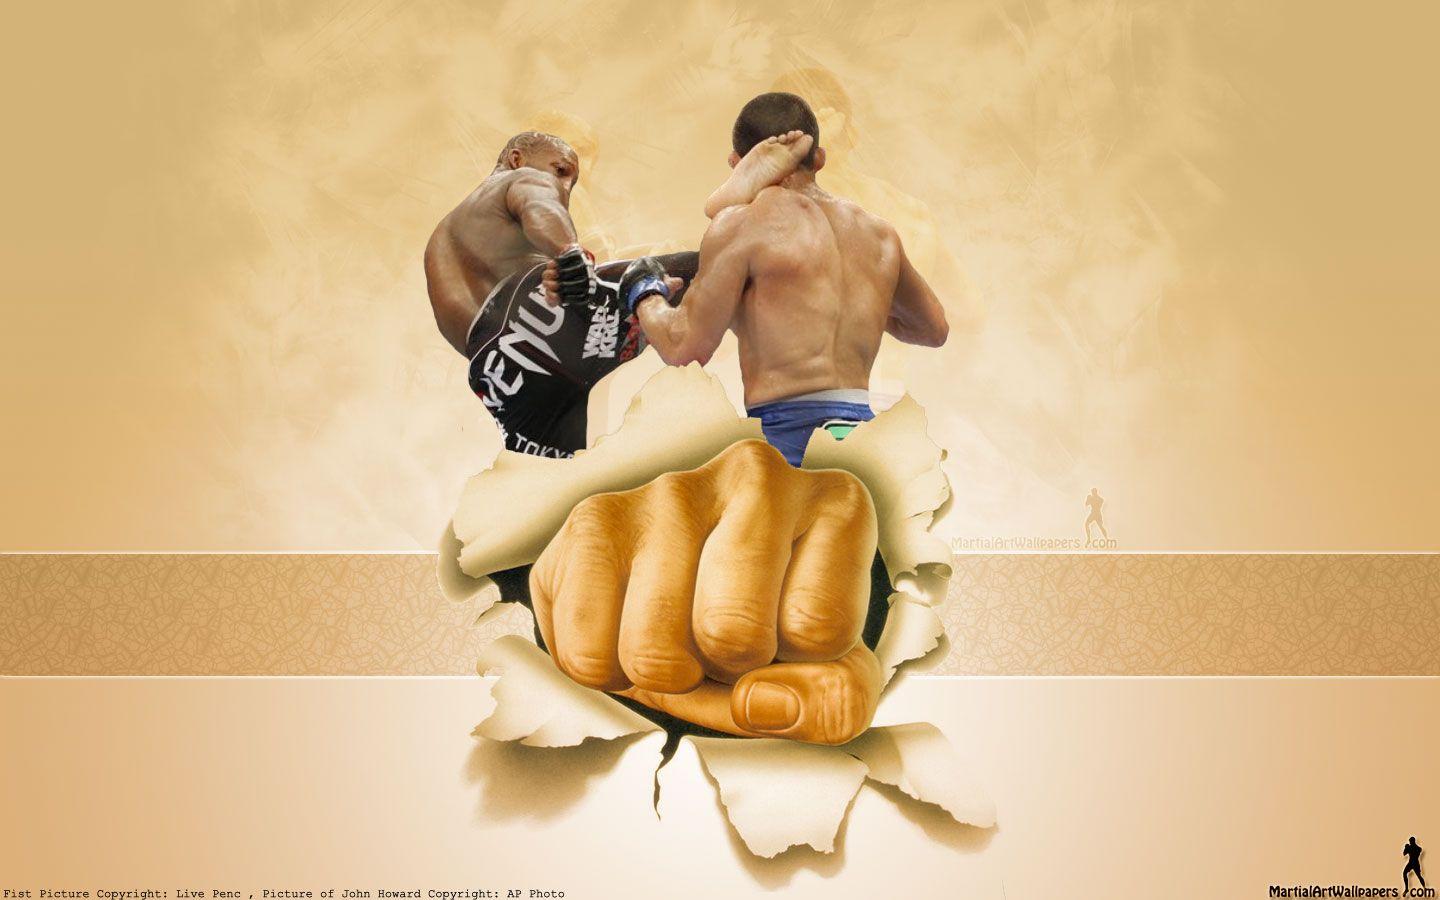 Kickboxing Wallpaper. Wide Wallpaper Collections